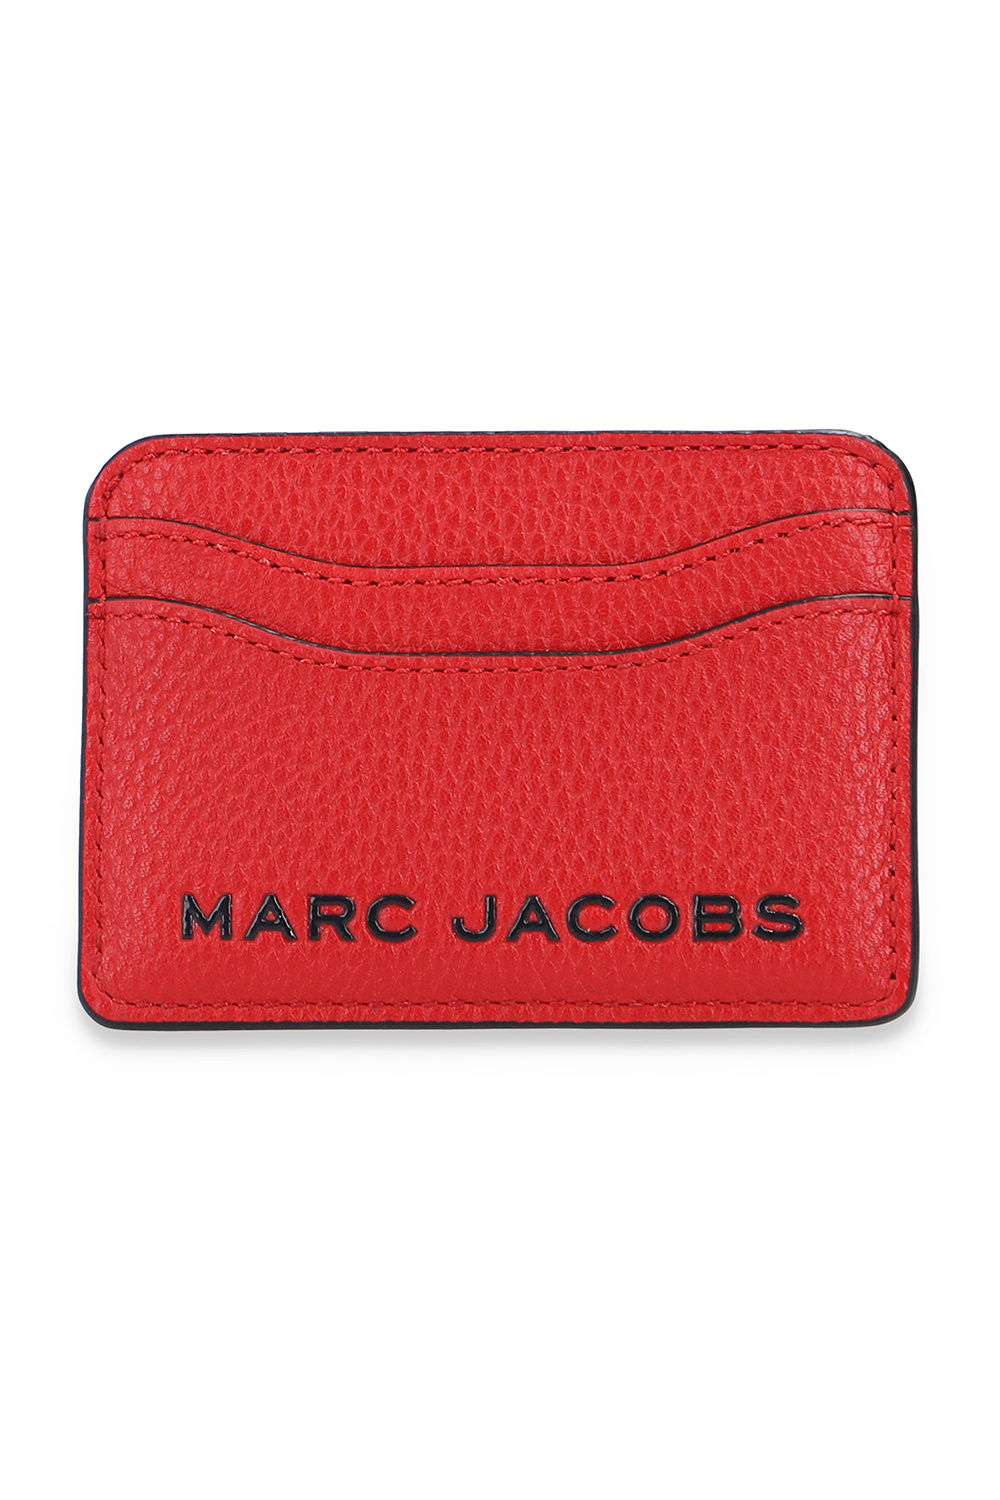 Marc Jacobs marc jacobs the textured box 23 bag item